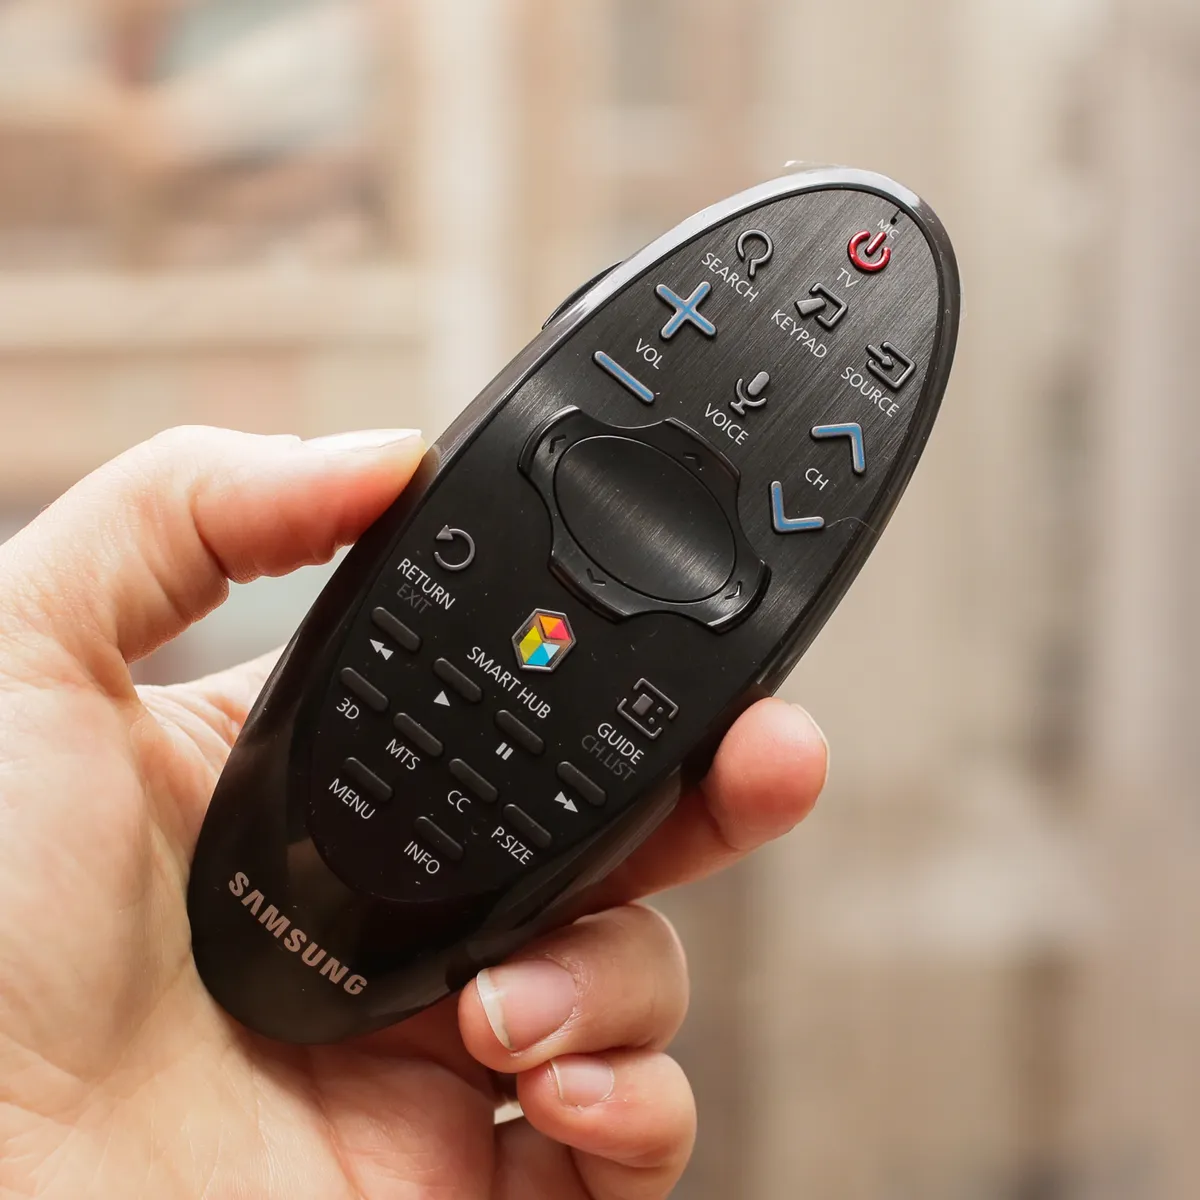 How To Get Keyboard On Samsung Smart TV Remote